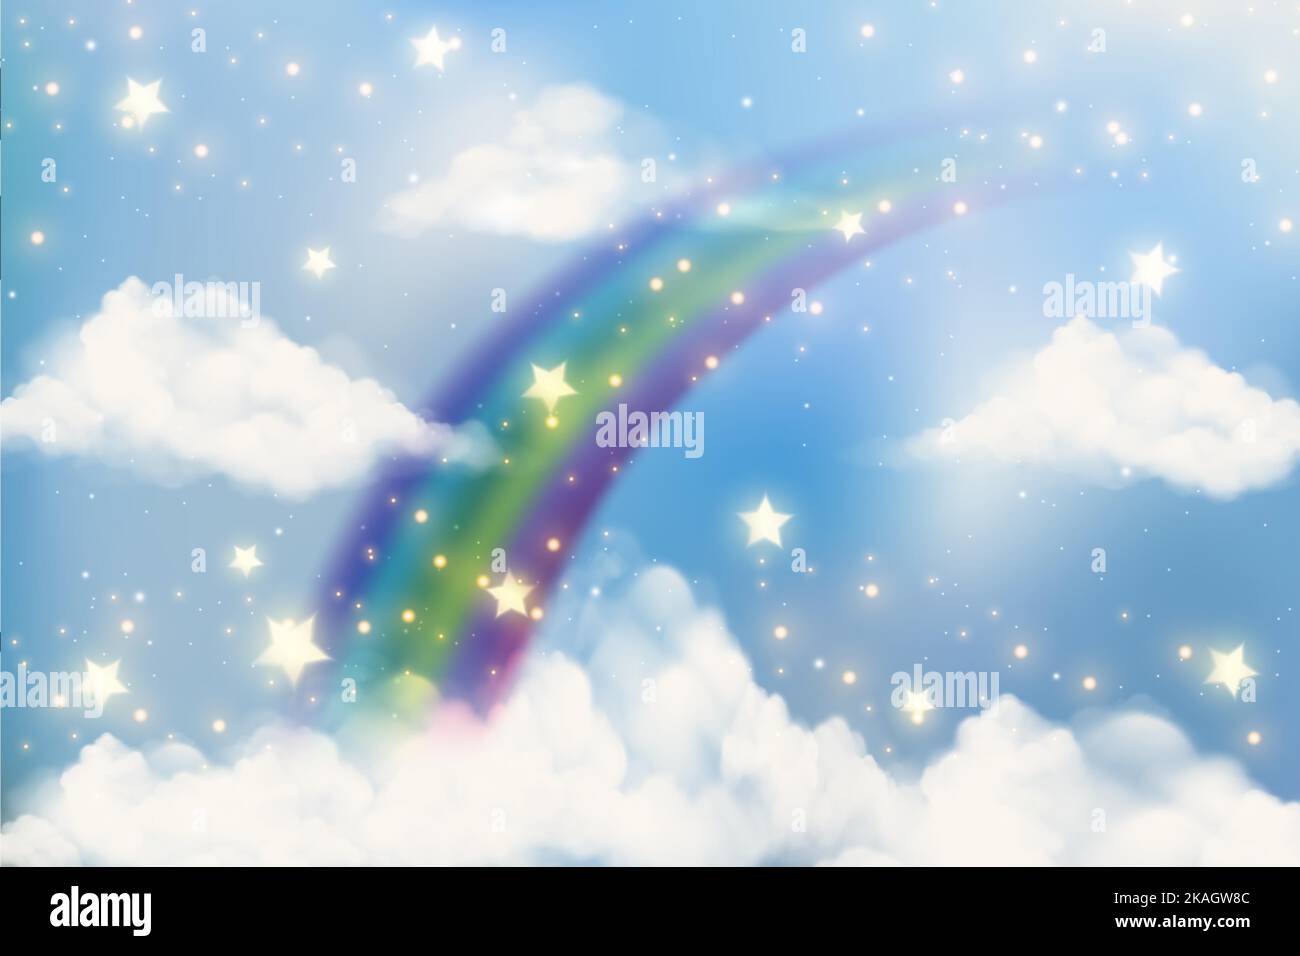 Rainbow and clouds on gradient background. Fantasy sky with stars. Unicorn abstract backdrop. Cute watercolor vector illustration. Stock Vector